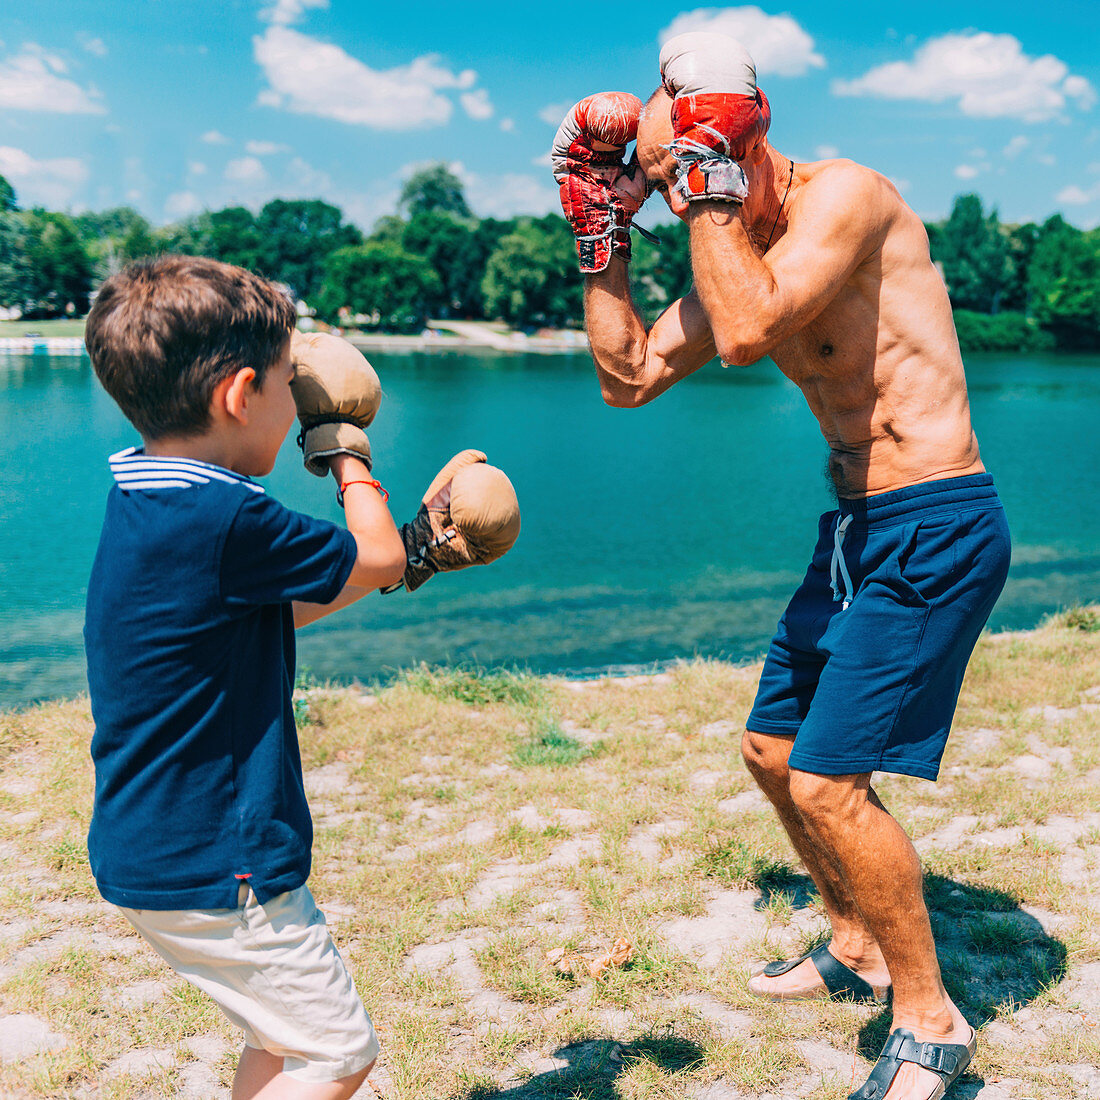 Grandfather and grandson boxing